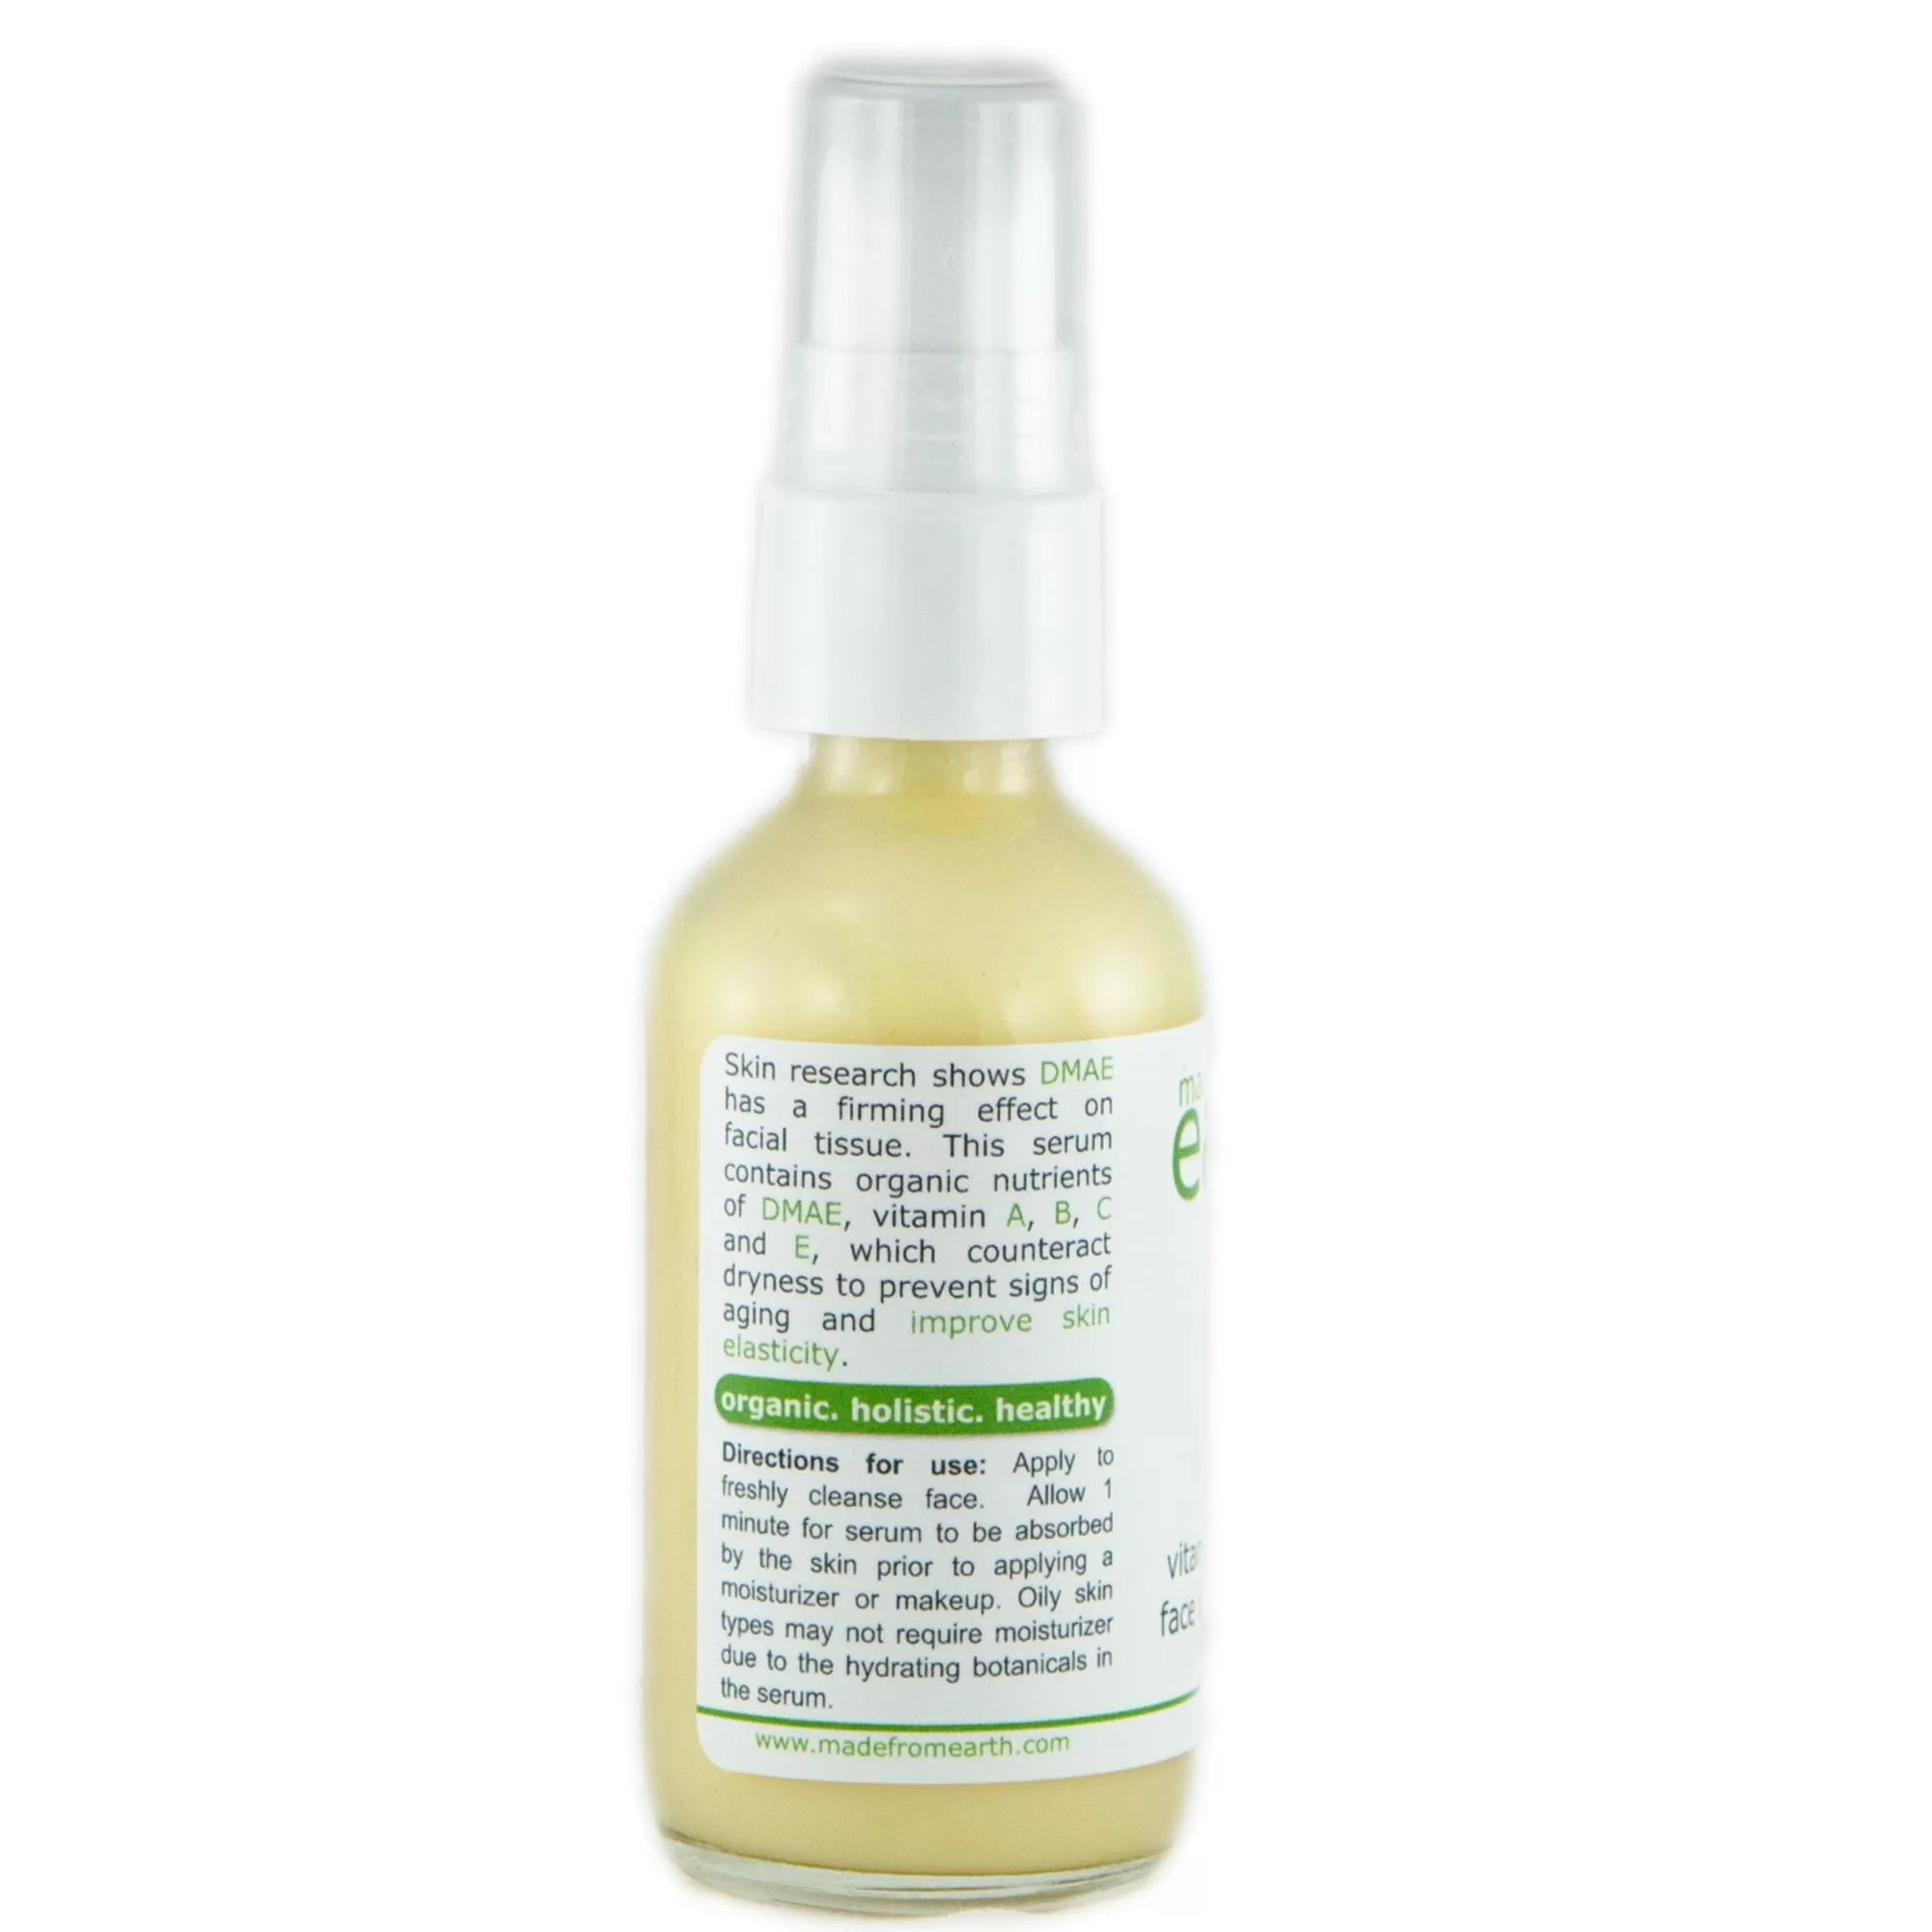 Vitamin Enhanced Face Firming Serum - Made from Earth